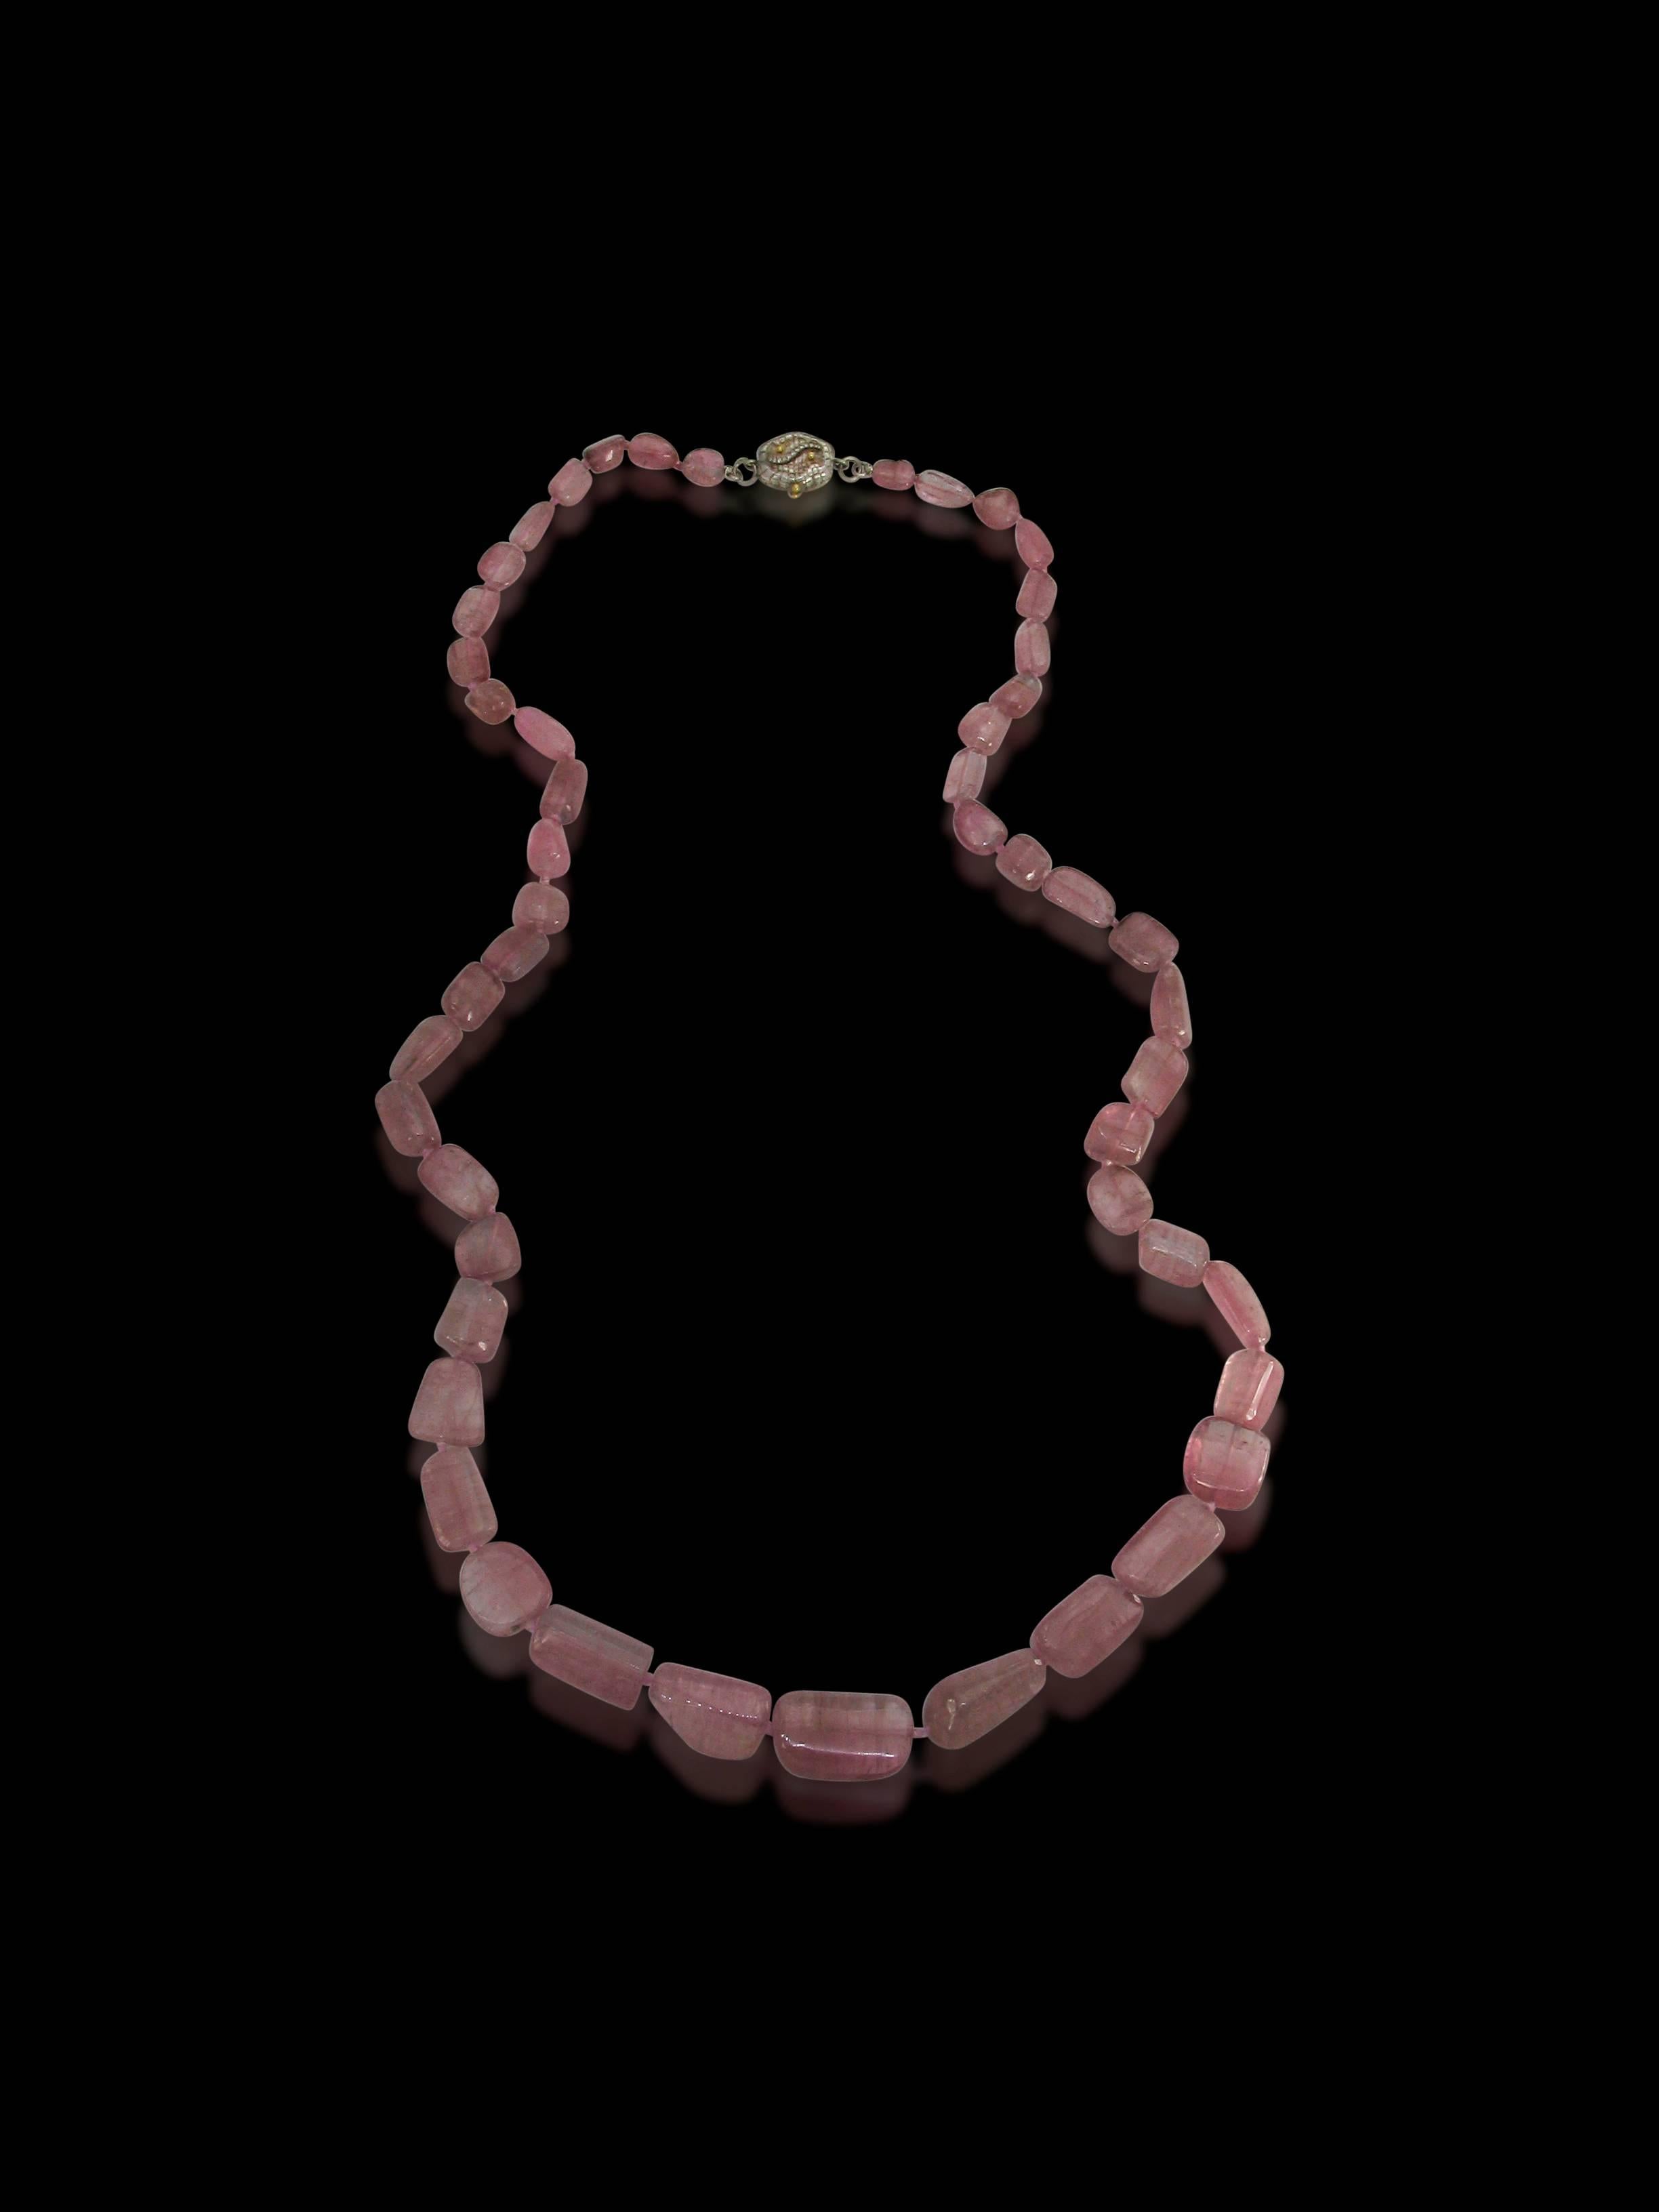 Pink Tourmaline Necklace with a Patinated Pearl and Diamond and Pearl Clamshell Clasp 

Pink Tourmalines weigh approximately 425 carats.  Diamond accents on clasp weigh a total of 0.11 carats.

This clasp is an original Victor Velyan design and